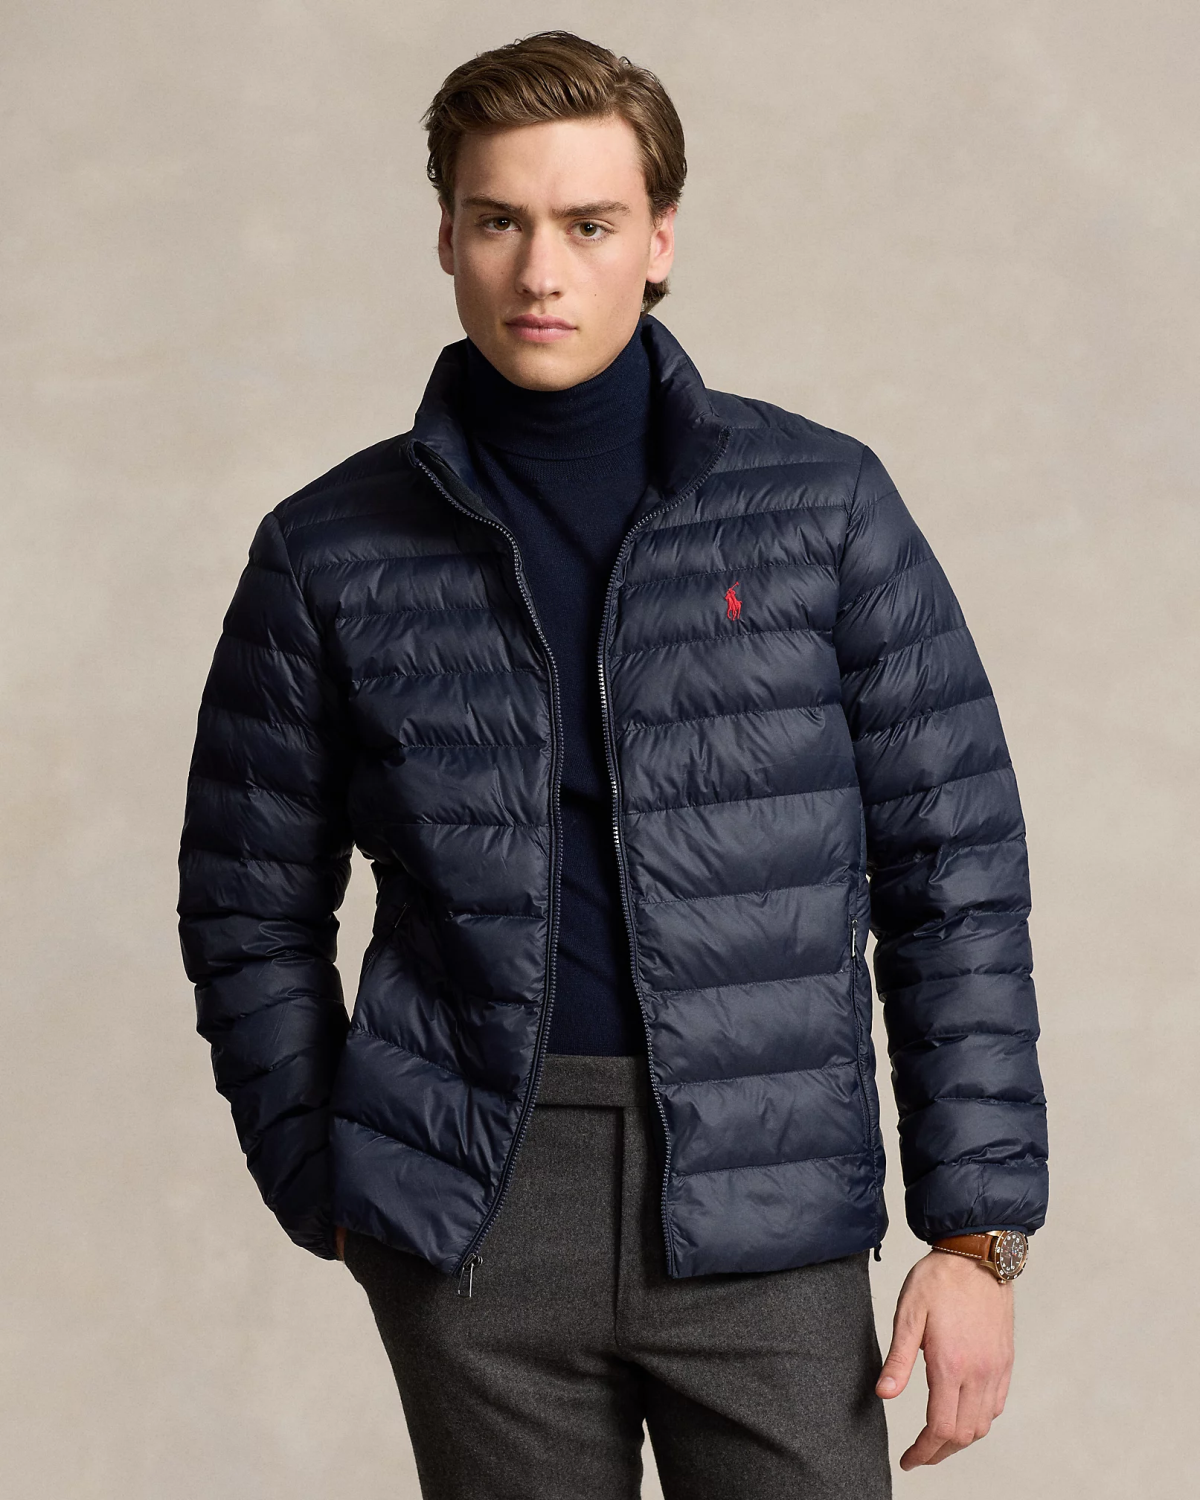 The Colden Packable Jacket